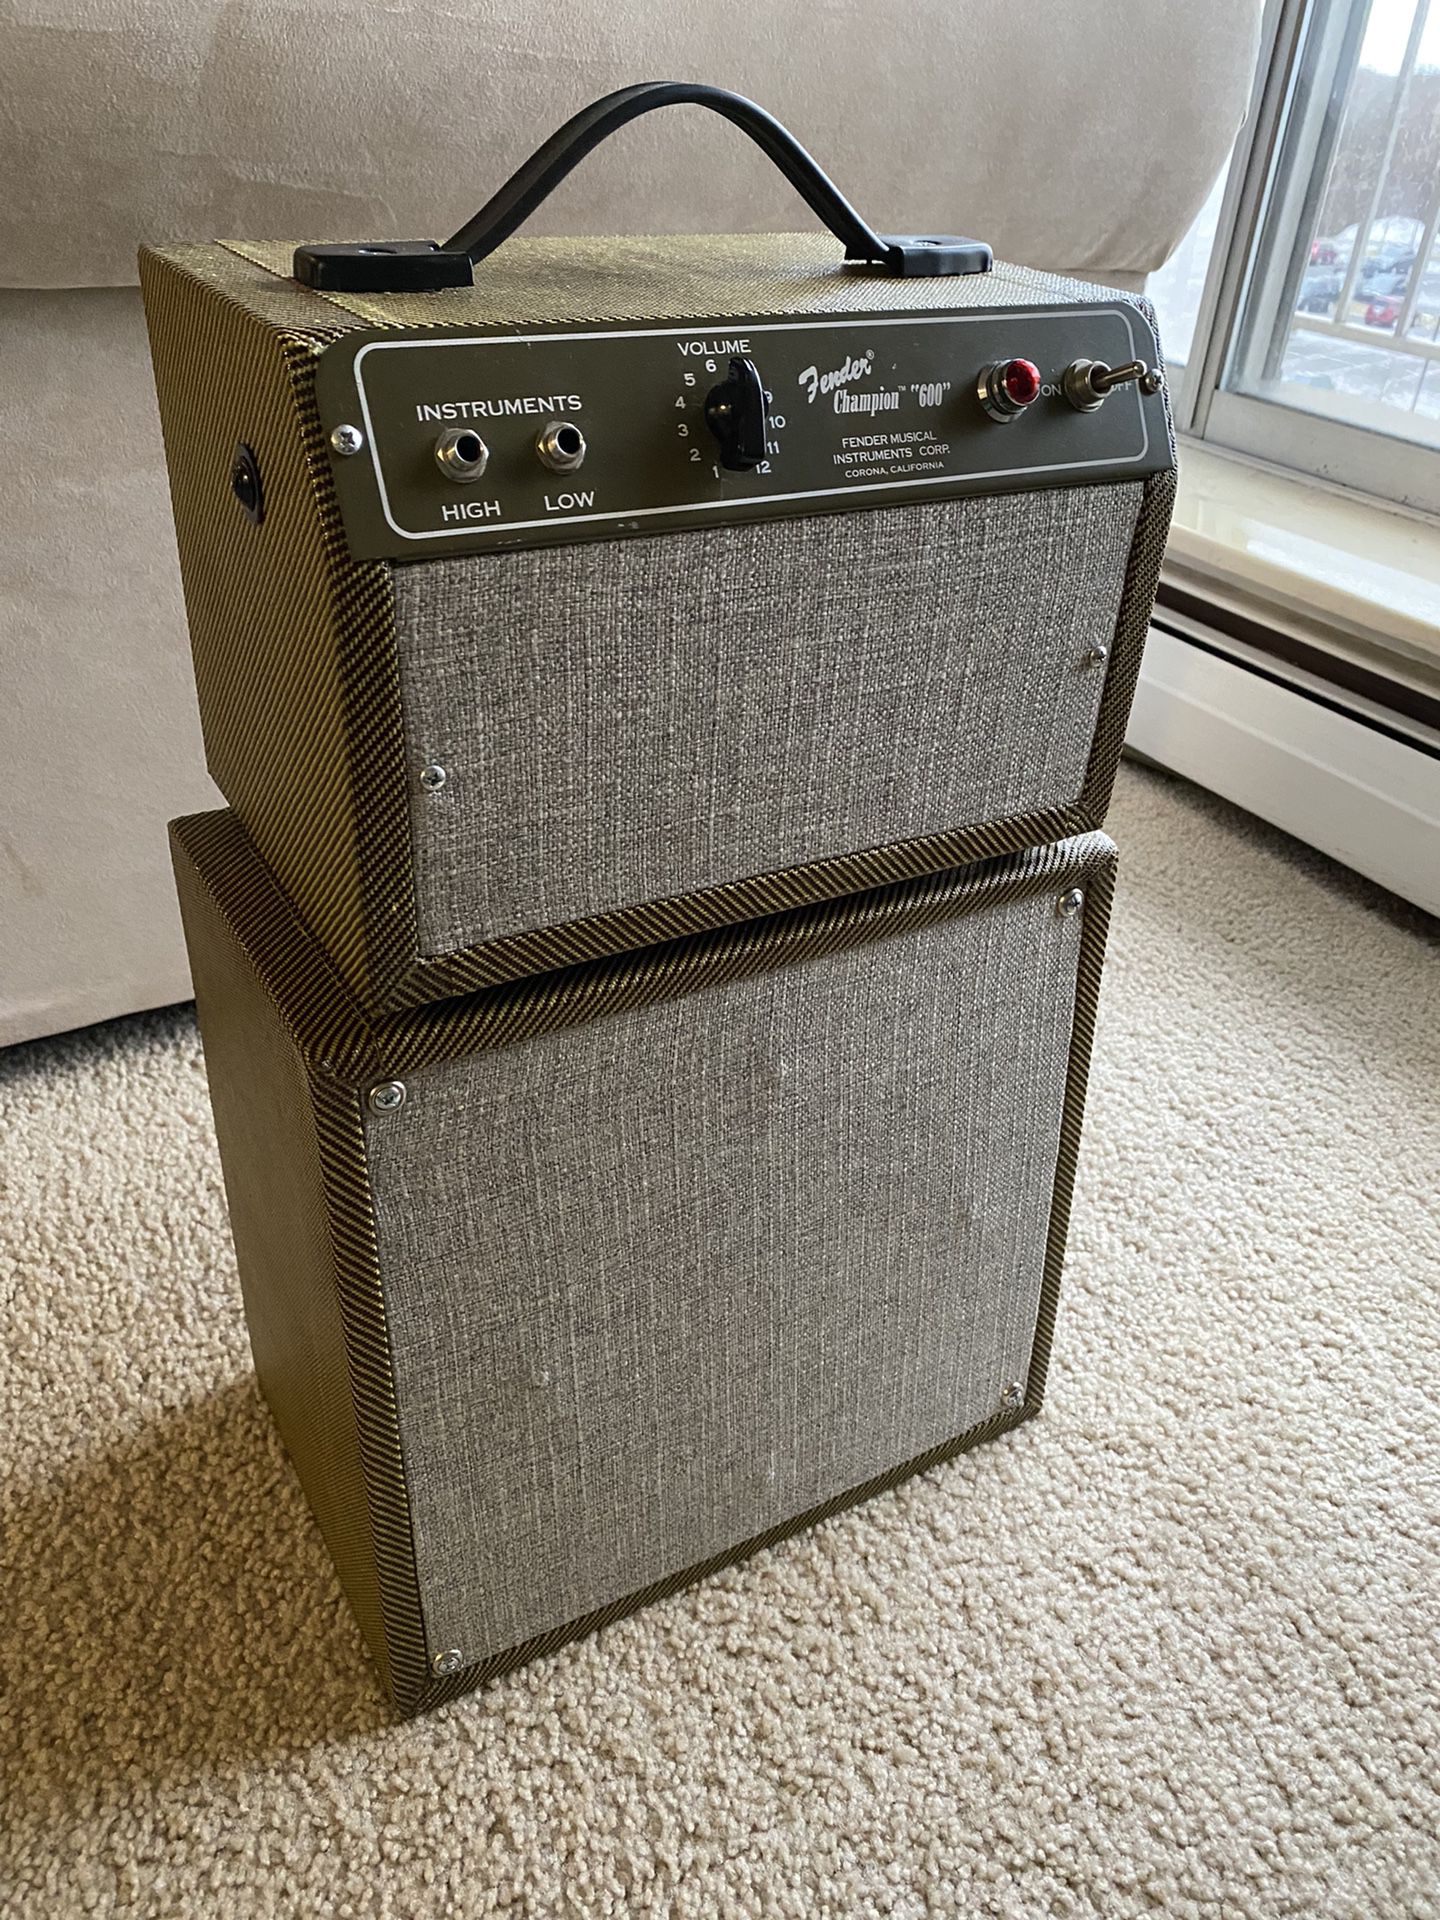 Fender Champion 600 With Custom Cab And Extension Cab for Sale in